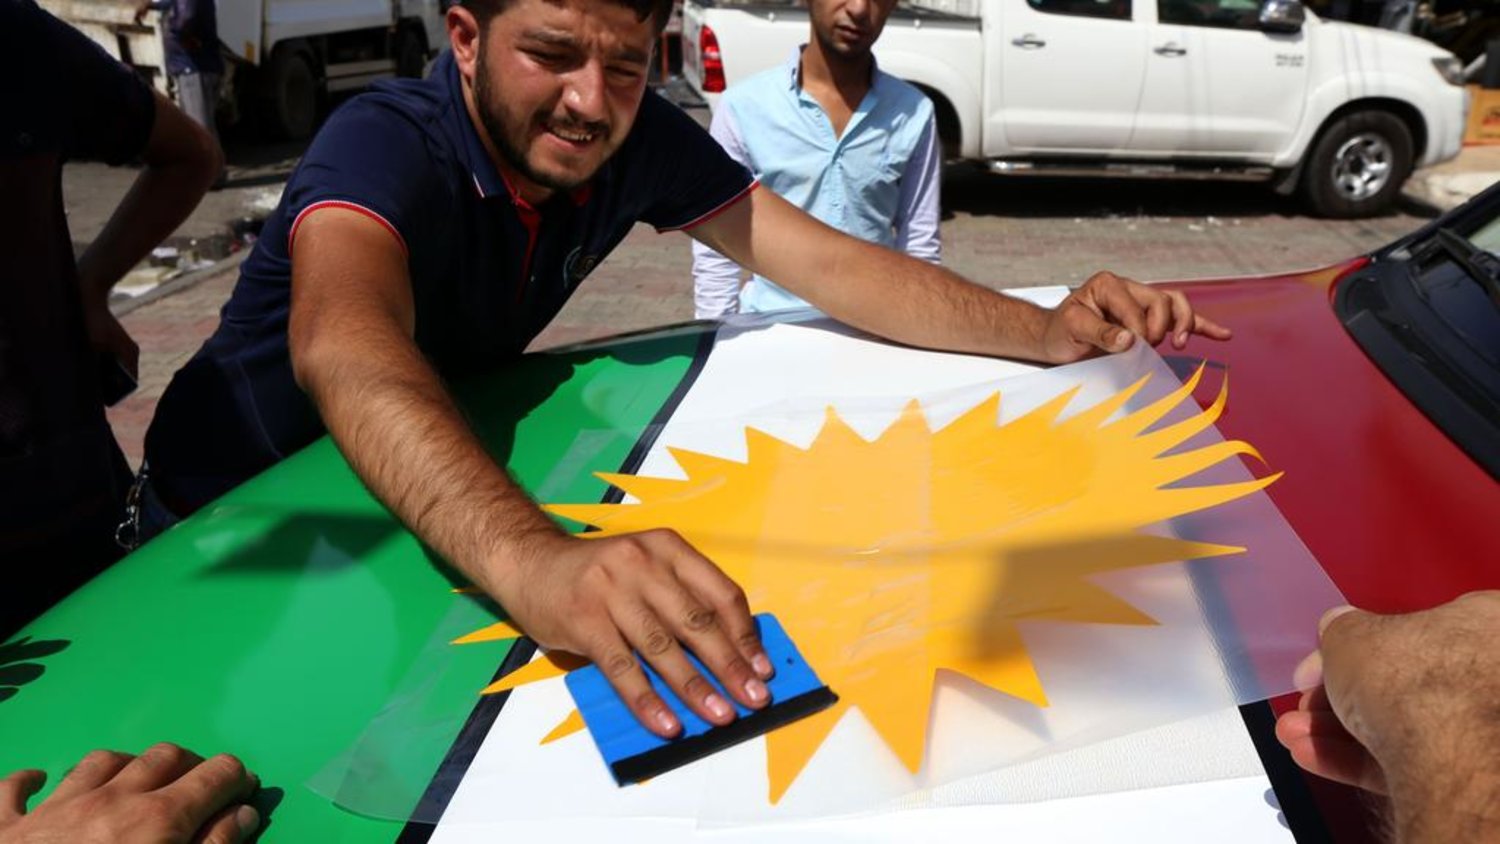  An Iraqi Kurdish man decorates a car with the Kurdish flags ahead of the upcoming independence referendum in Erbil, the capital of the autonomous Kurdish region of northern Iraq, on September 7, 2017. AFP PHOTO / SAFIN HAMED